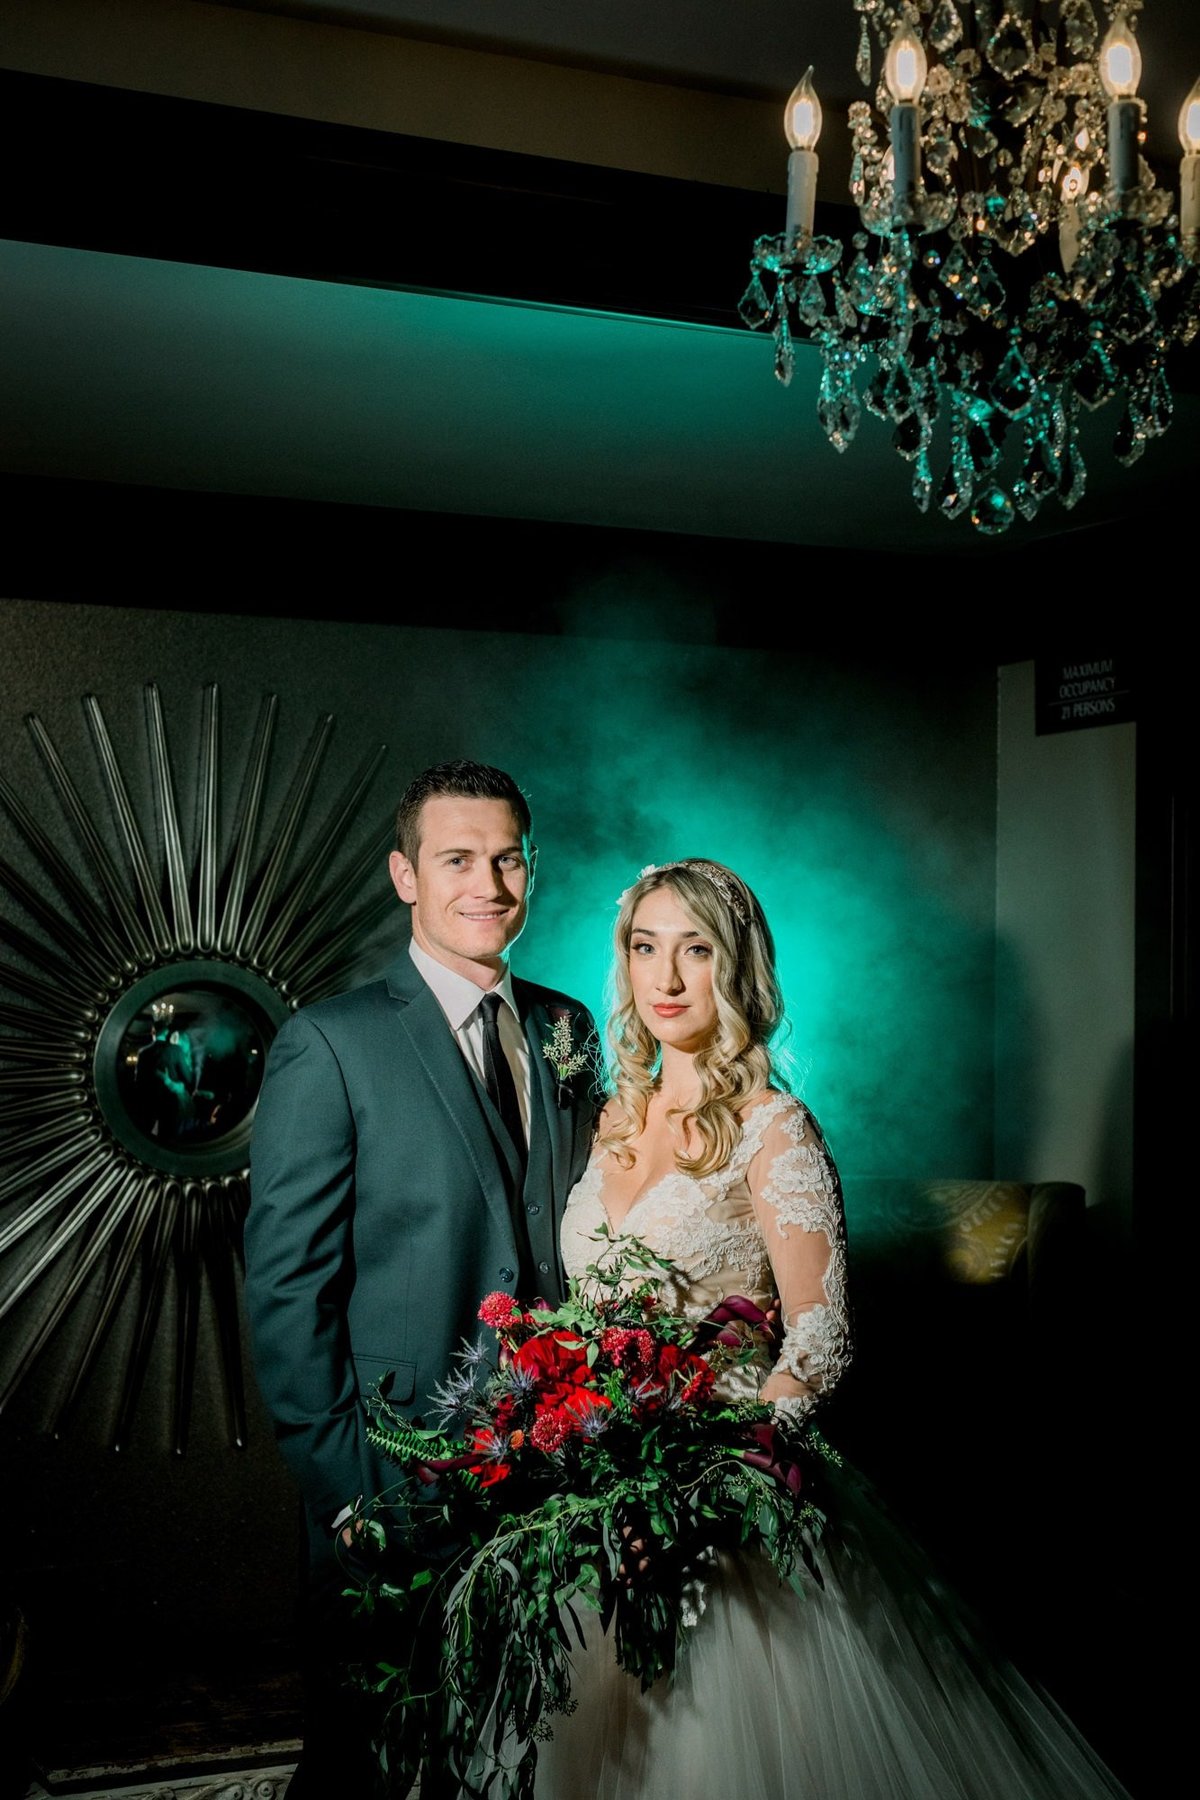 Bride and Groom pose together as she holds her large bouquet with a greenish mist behind them